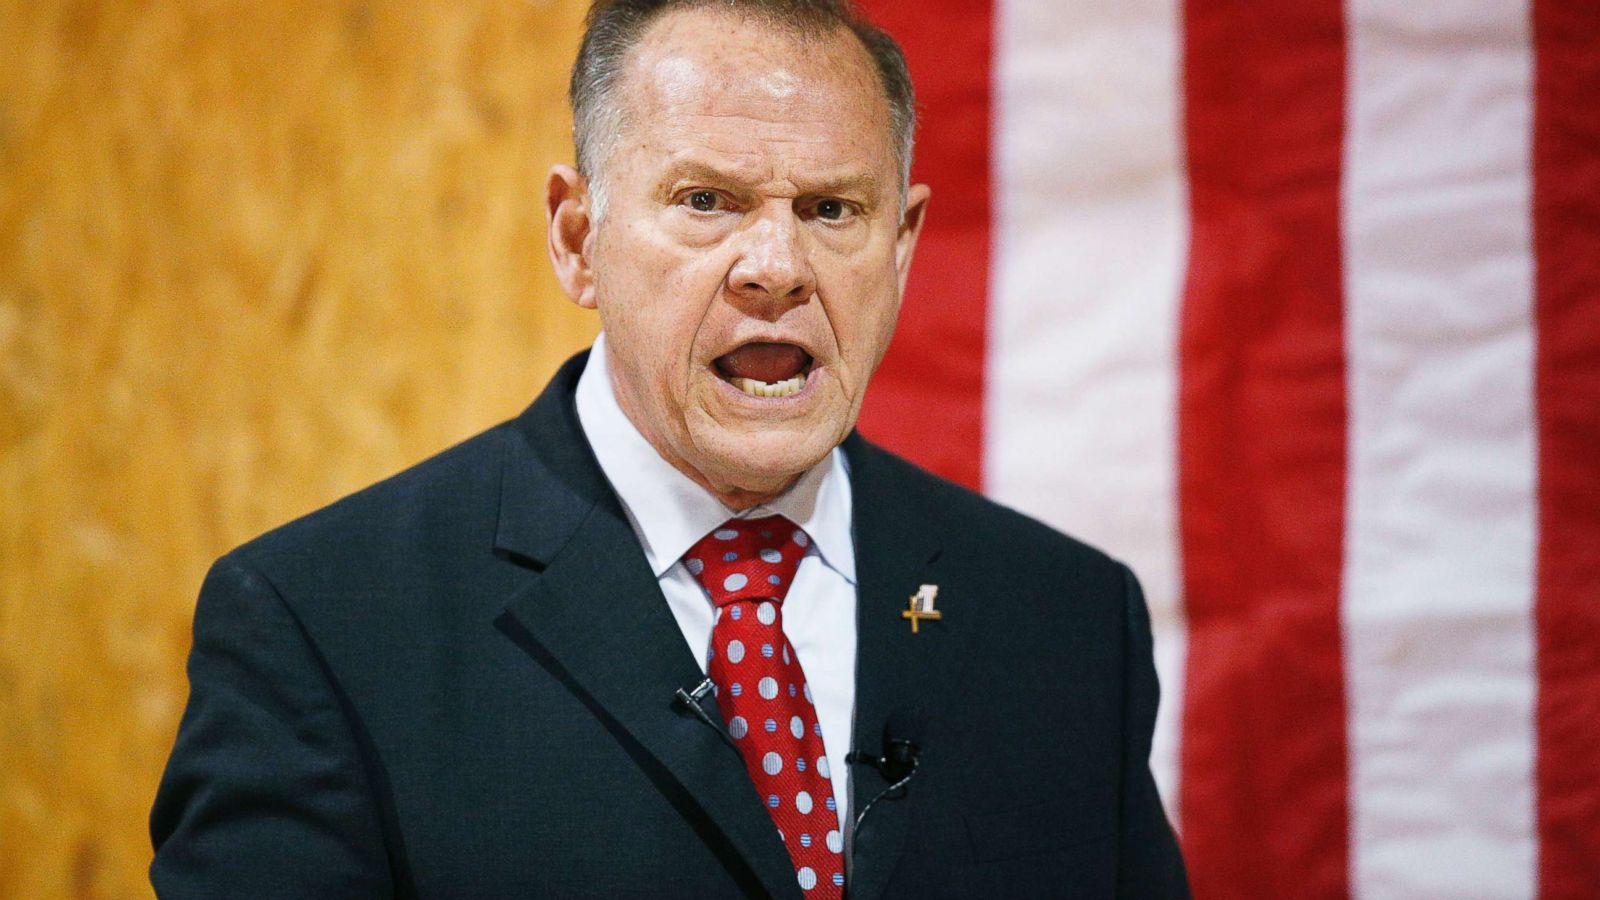 20-facts-about-judge-roy-moore